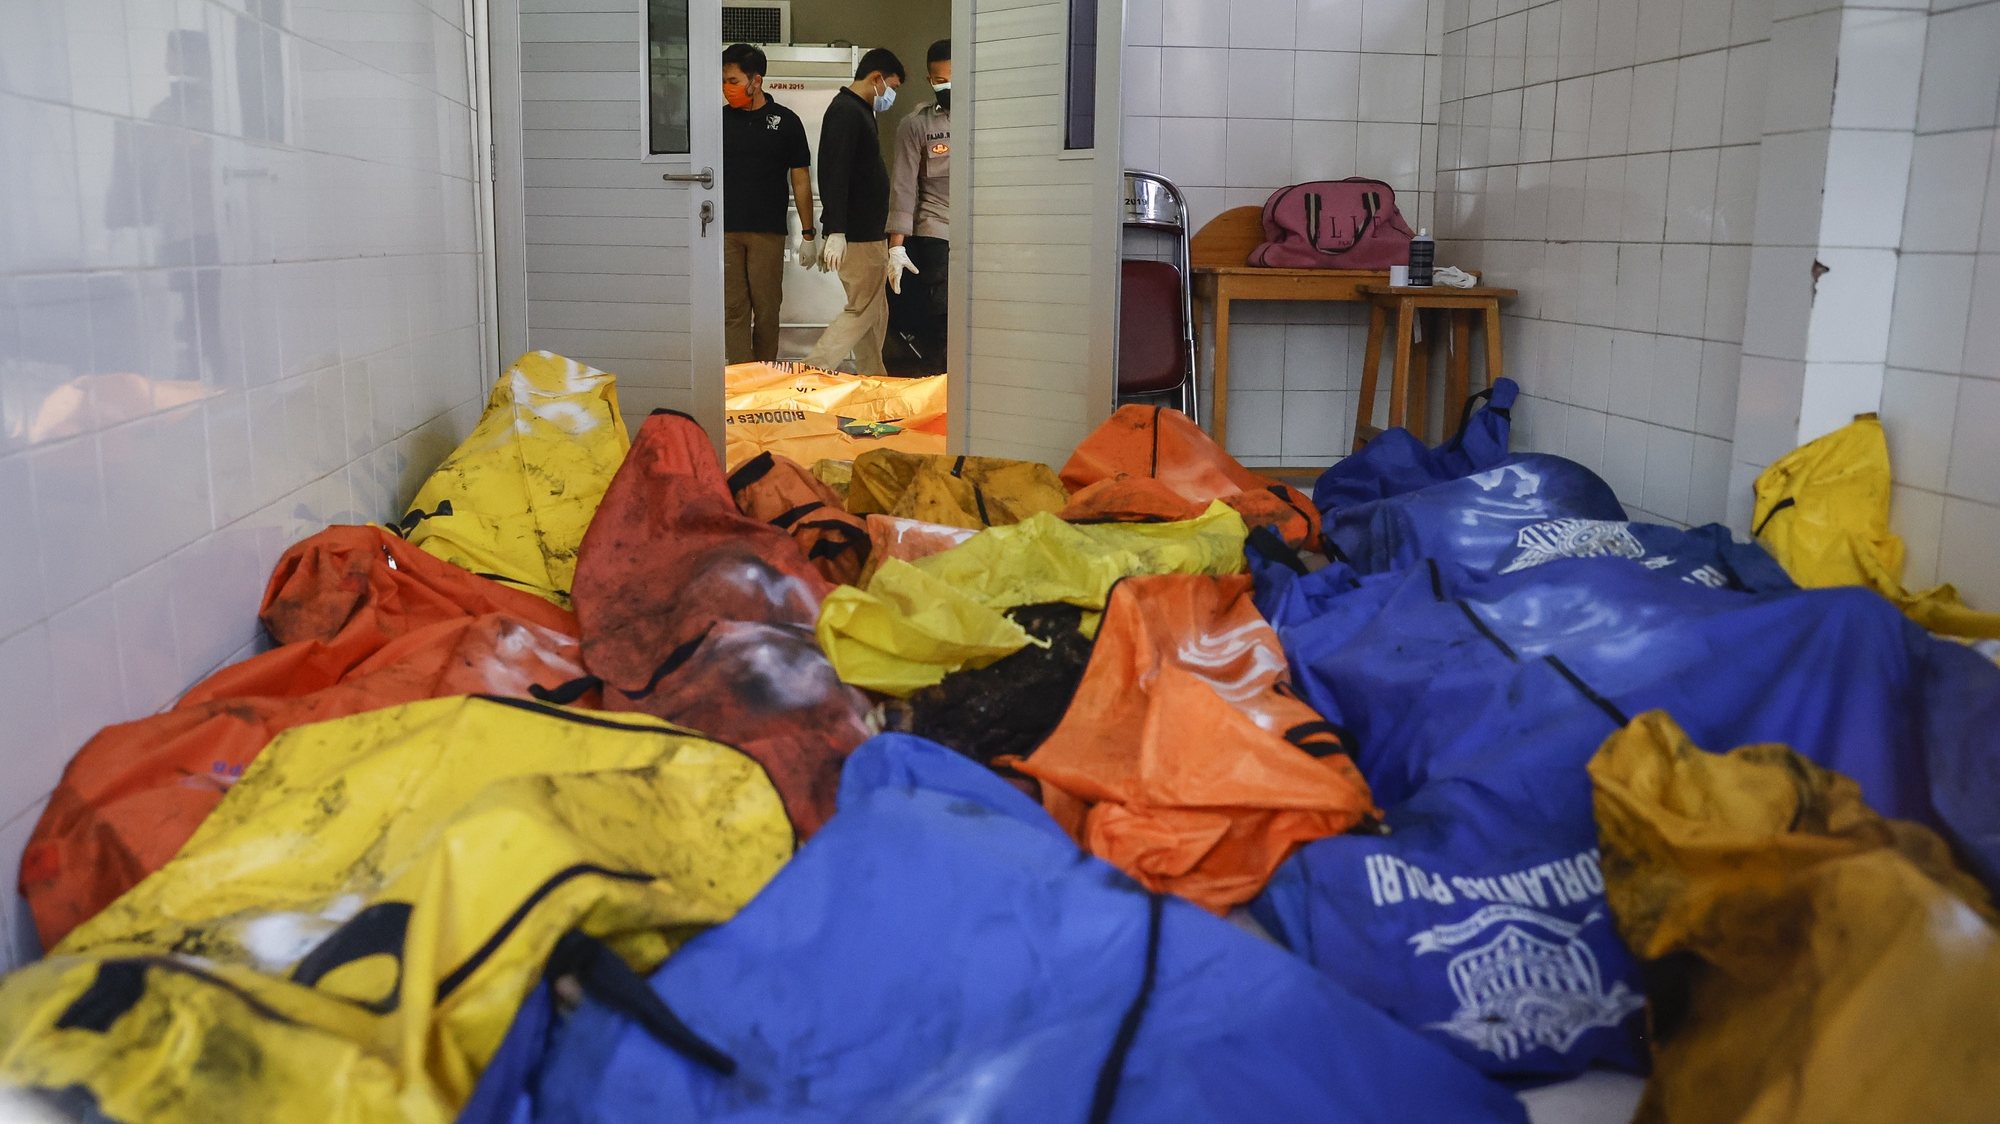 epa09454476 Disaster Victims Identification (DVI) police officers inspect body bags in the aftermath of a prison fire, at a hospital in Tangerang, Banten, Indonesia, 08 September 2021. A fire broke out in a prison in Tangerang killing at least 41 people and injuring dozens.  EPA/MAST IRHAM